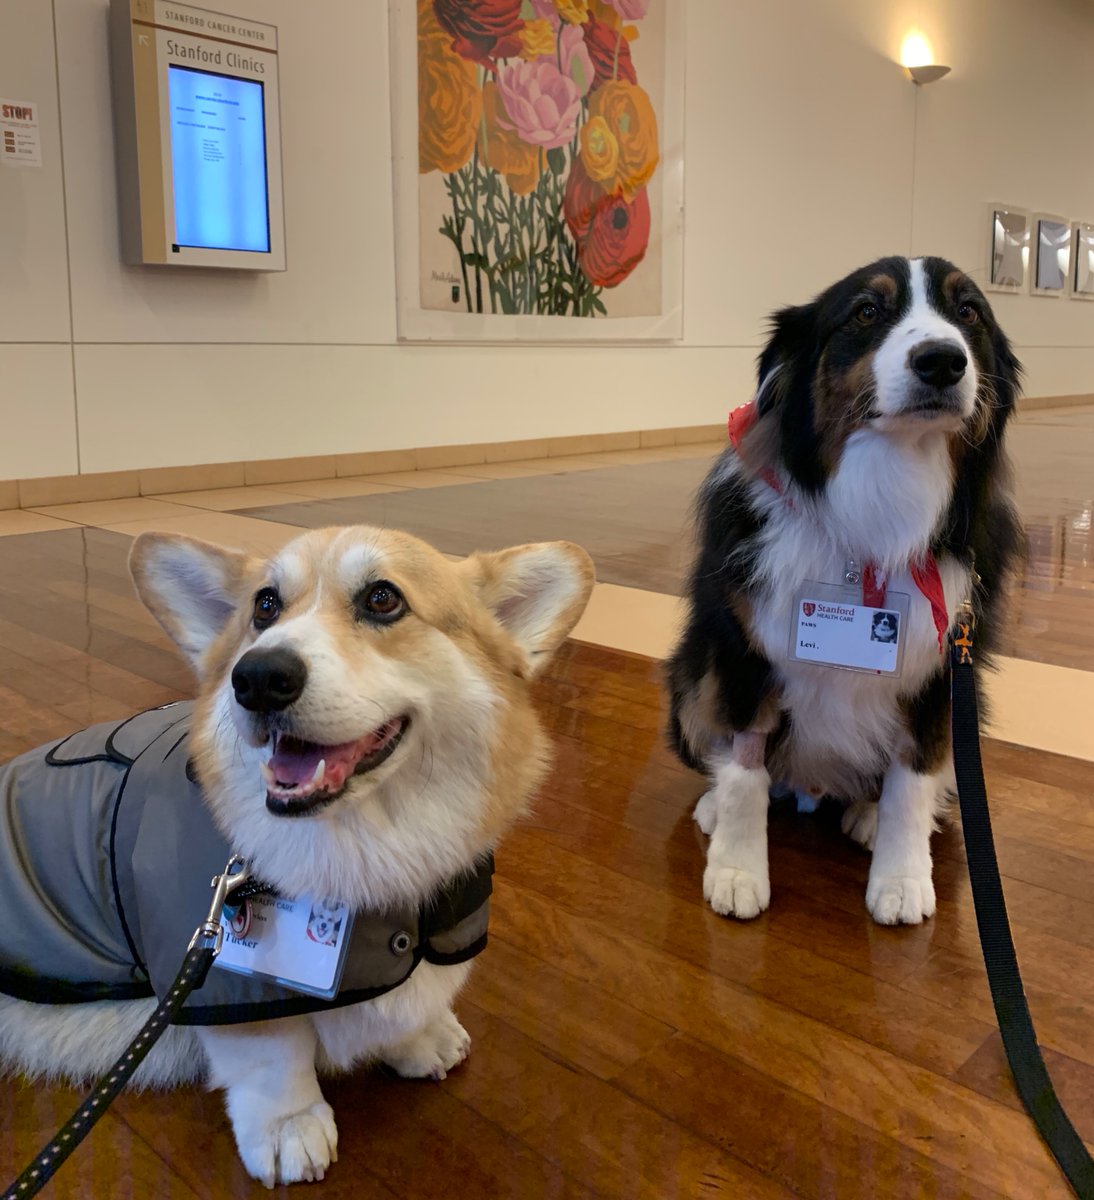 The dog lover in me could not pass up the chance to thank our therapy dogs along with their dedicated handlers who volunteer their time and compassion to brighten up our lives! #nationaltherapyanimalday